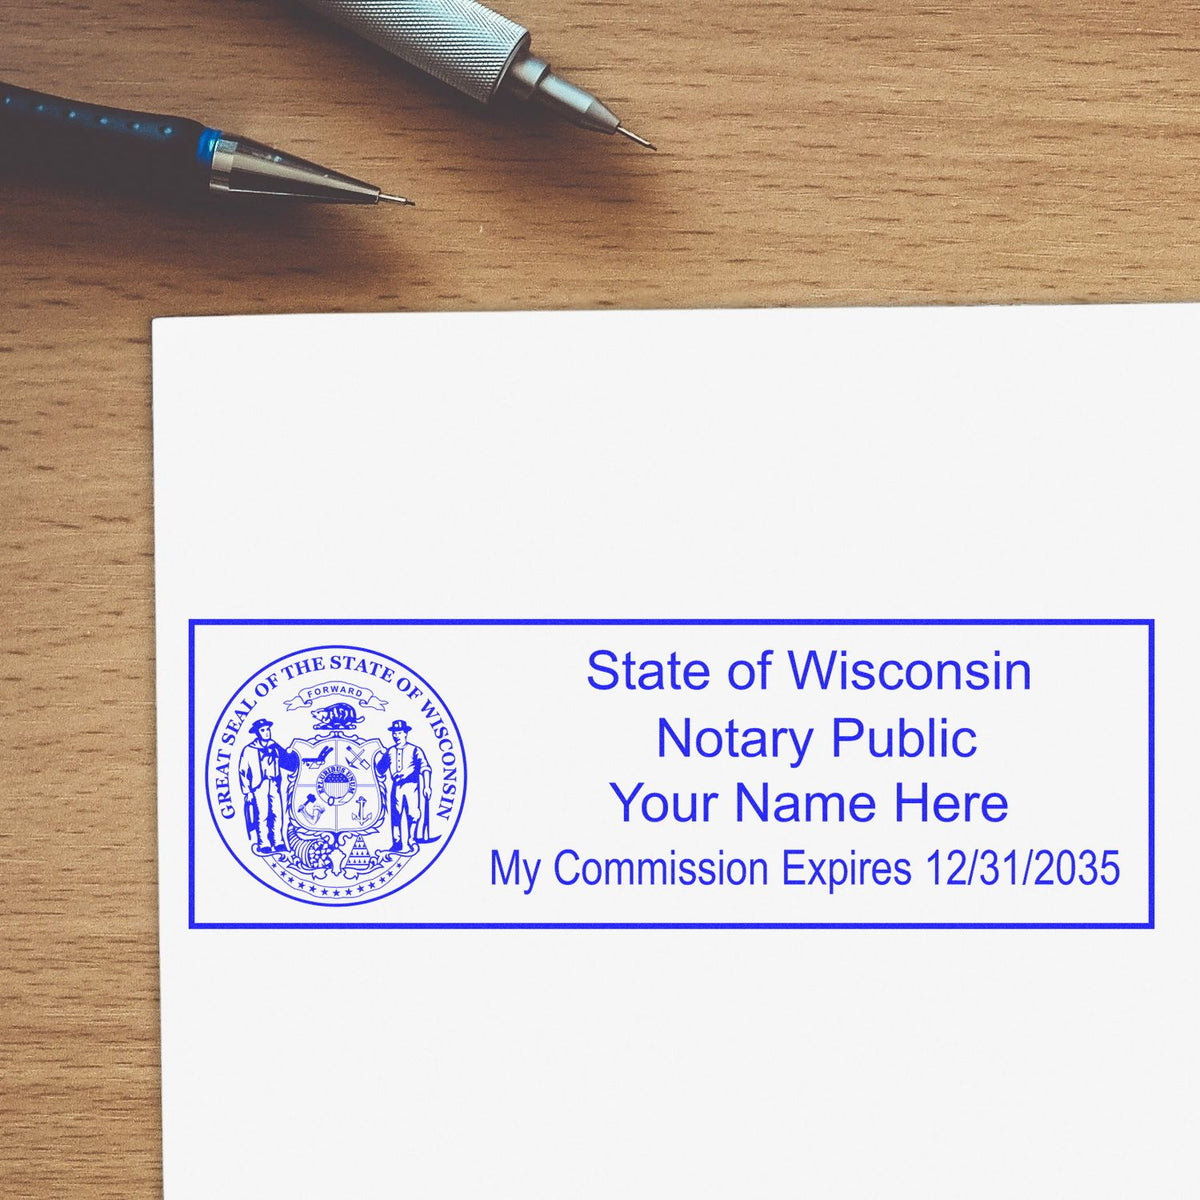 The PSI Wisconsin Notary Stamp stamp impression comes to life with a crisp, detailed photo on paper - showcasing true professional quality.